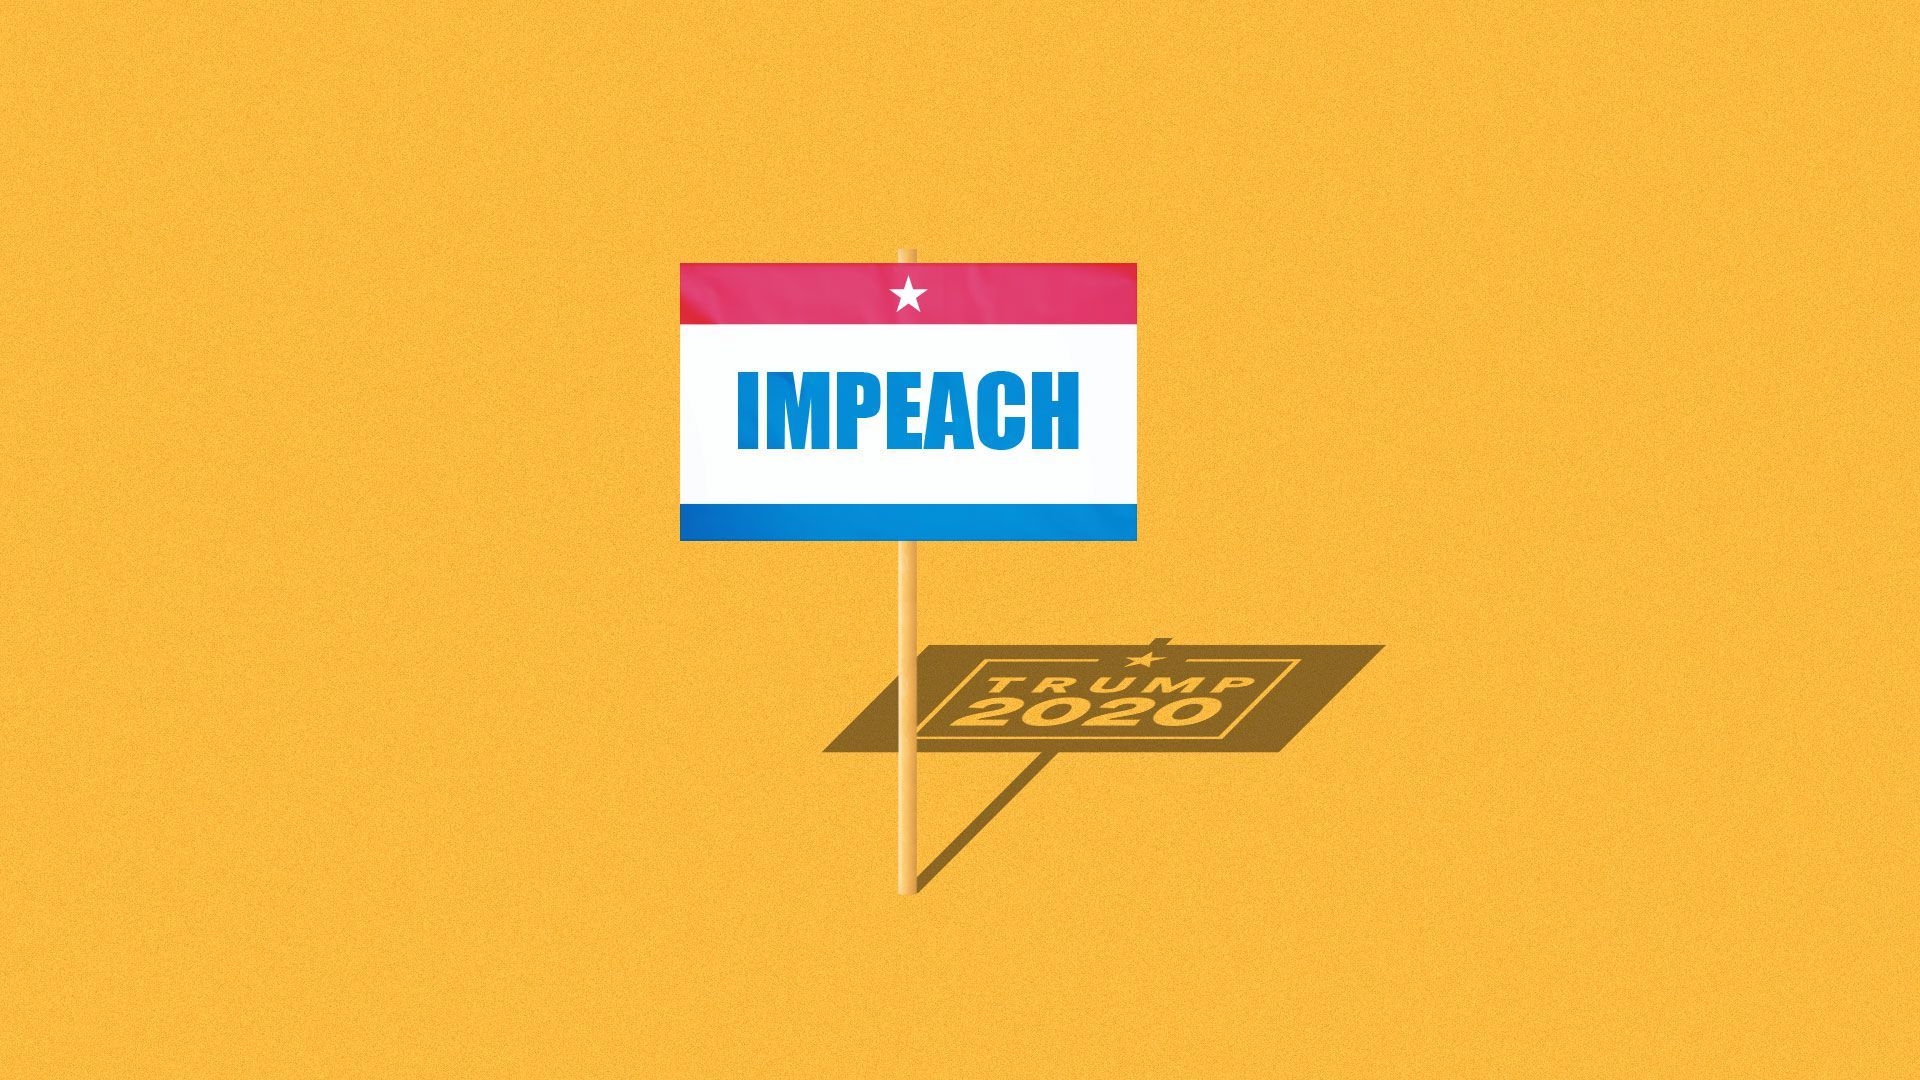 A sign that says "impeach" with "Trump 2020" in its shadow